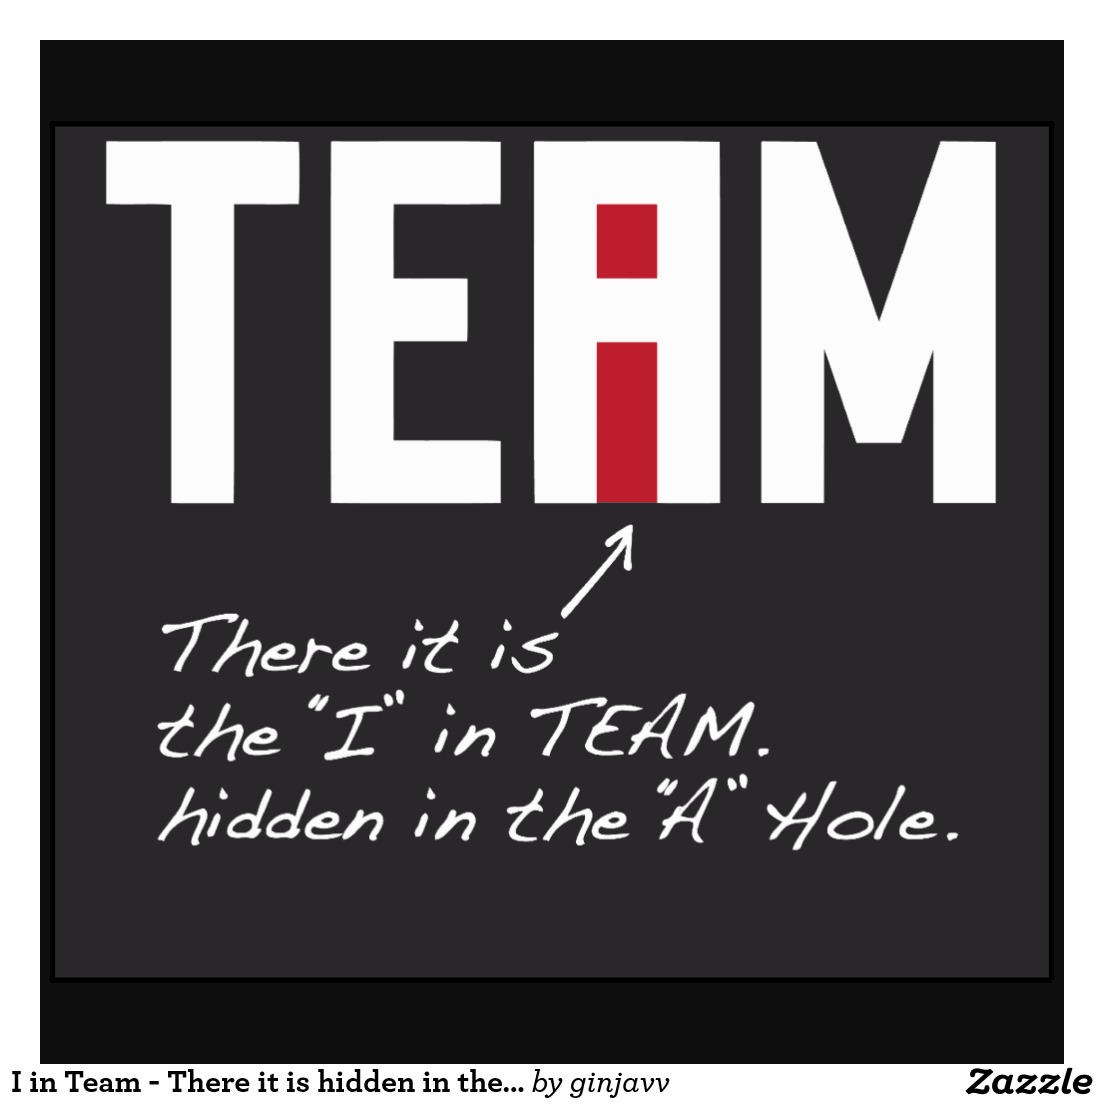 i_in_team_there_it_is_hidden_in_the_a_hole_tshirt-r0aff1796c915419aaa4c3f9c73794dcf_f0yq2_1024